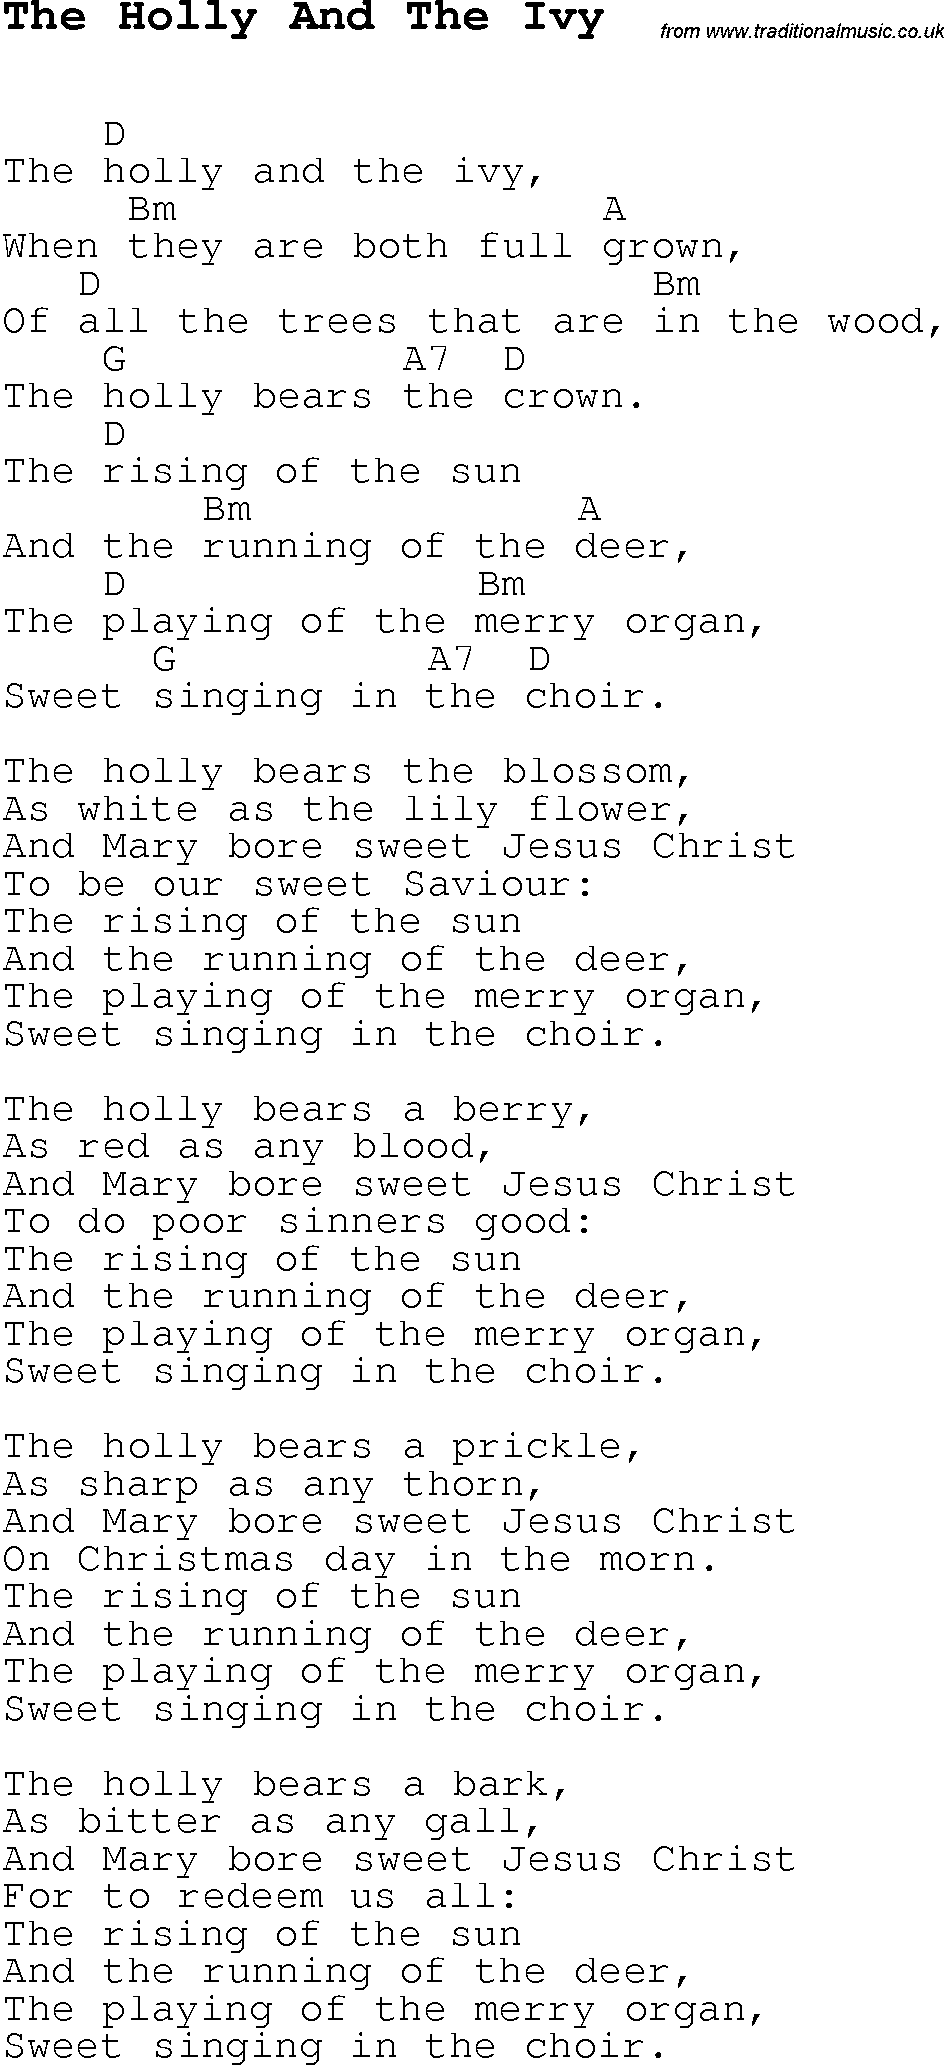 Christmas Carol/Song lyrics with chords for The Holly And The Ivy